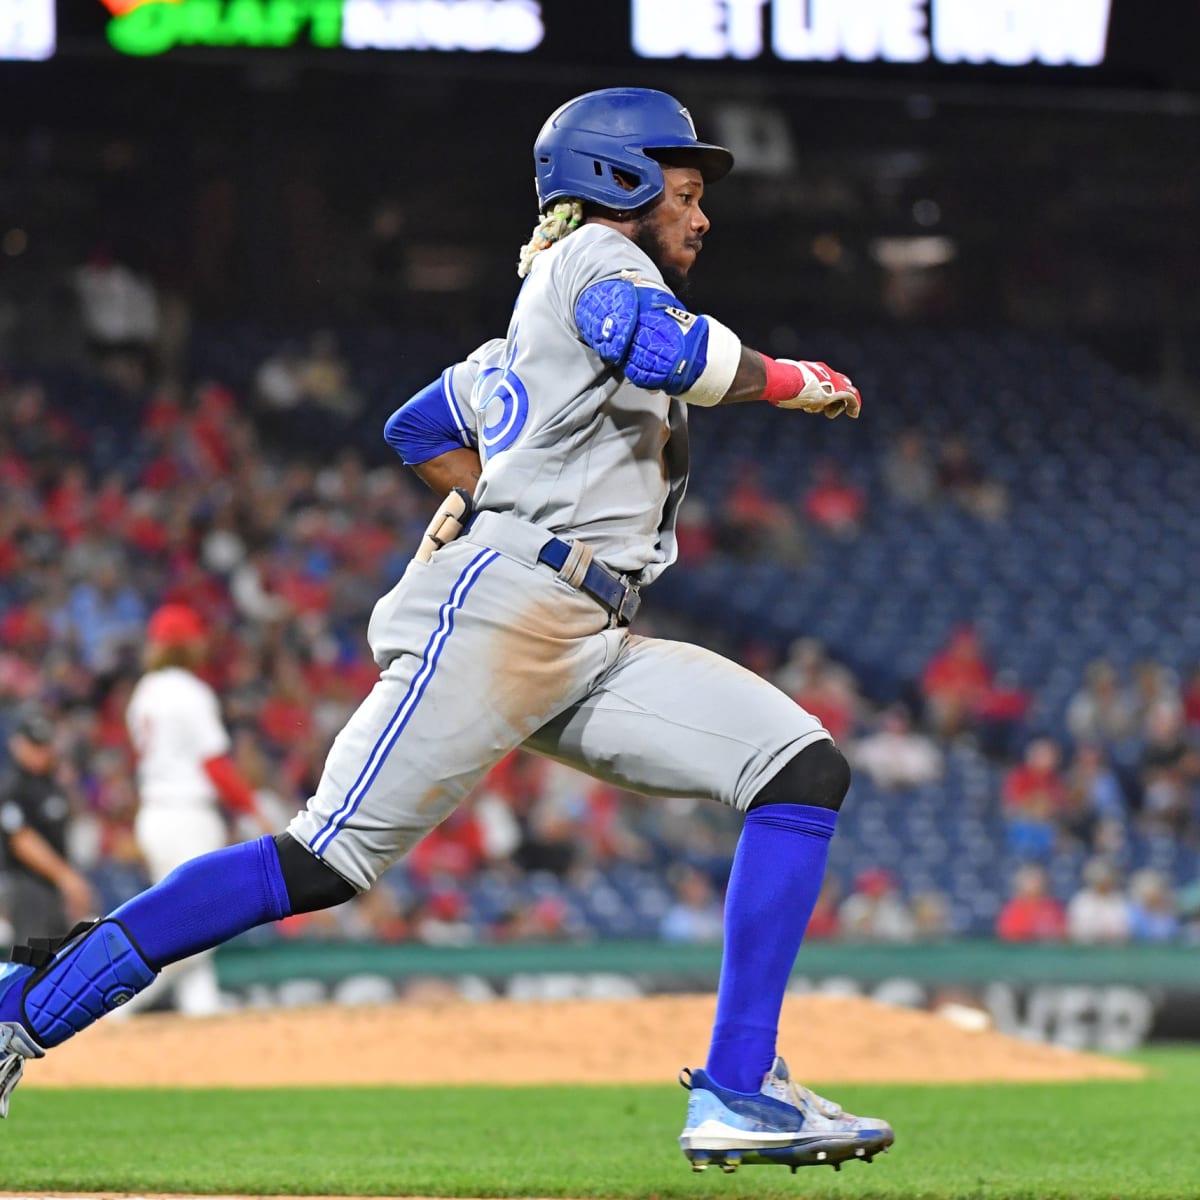 Raimel Tapia and prospect traded to Toronto Blue Jays for Randal Grichuk